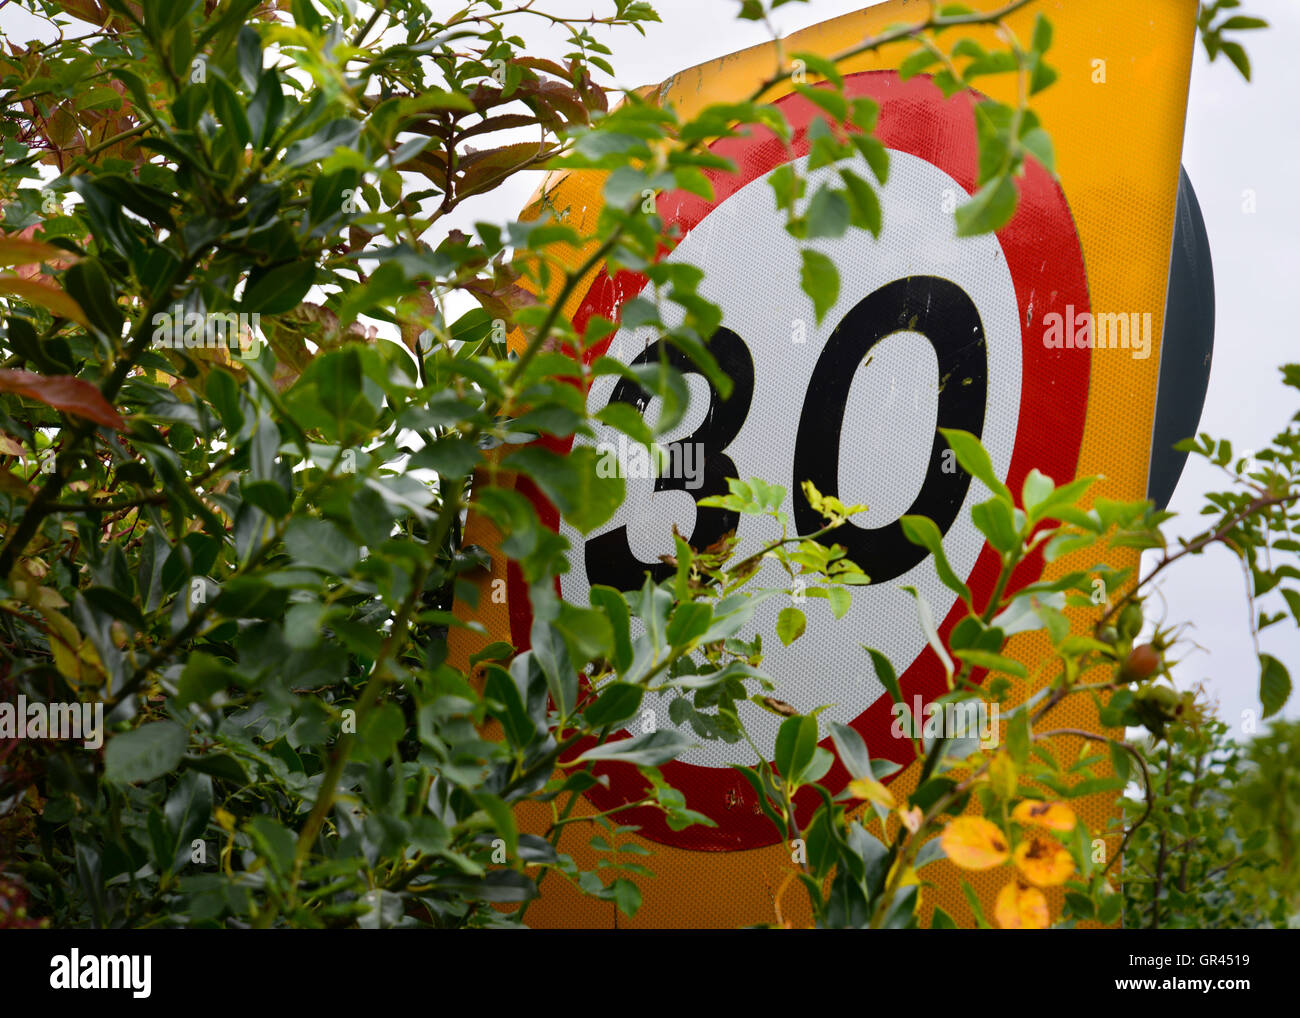 A 30 MPH traffic sign obscured by bushes Stock Photo